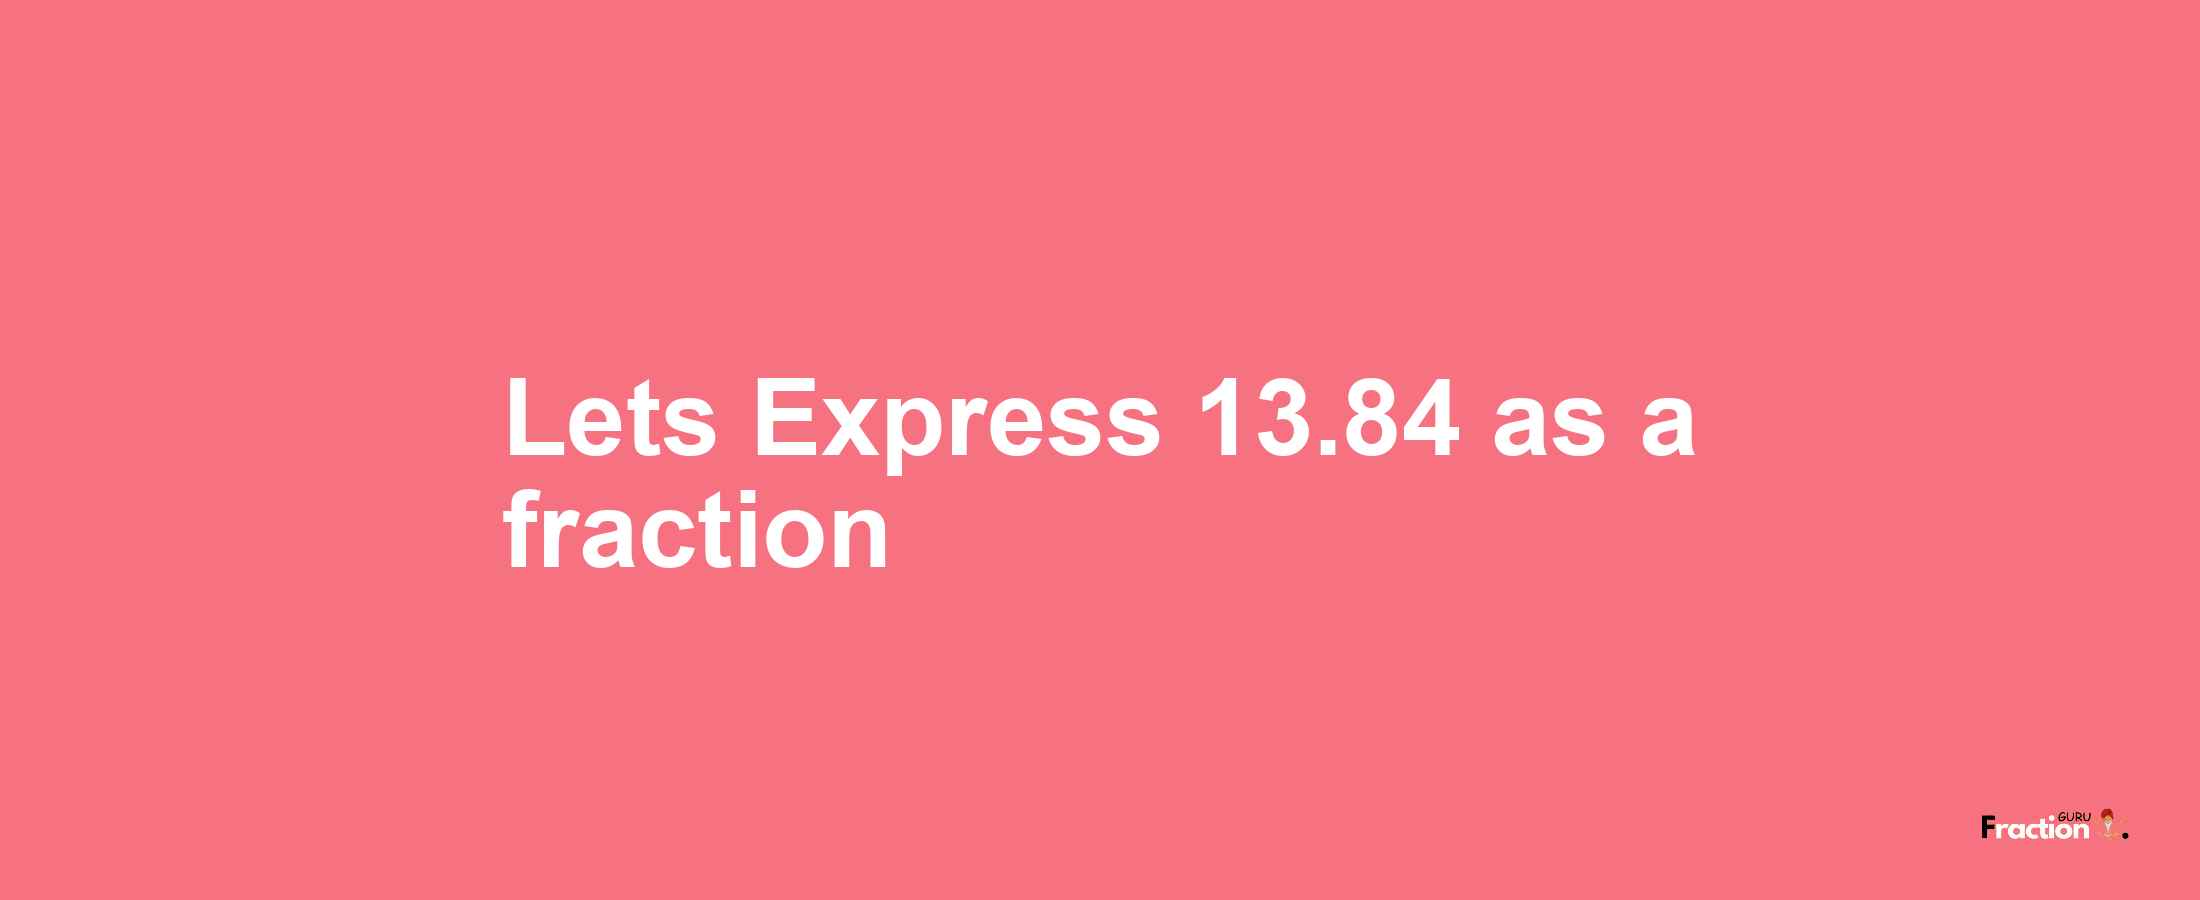 Lets Express 13.84 as afraction